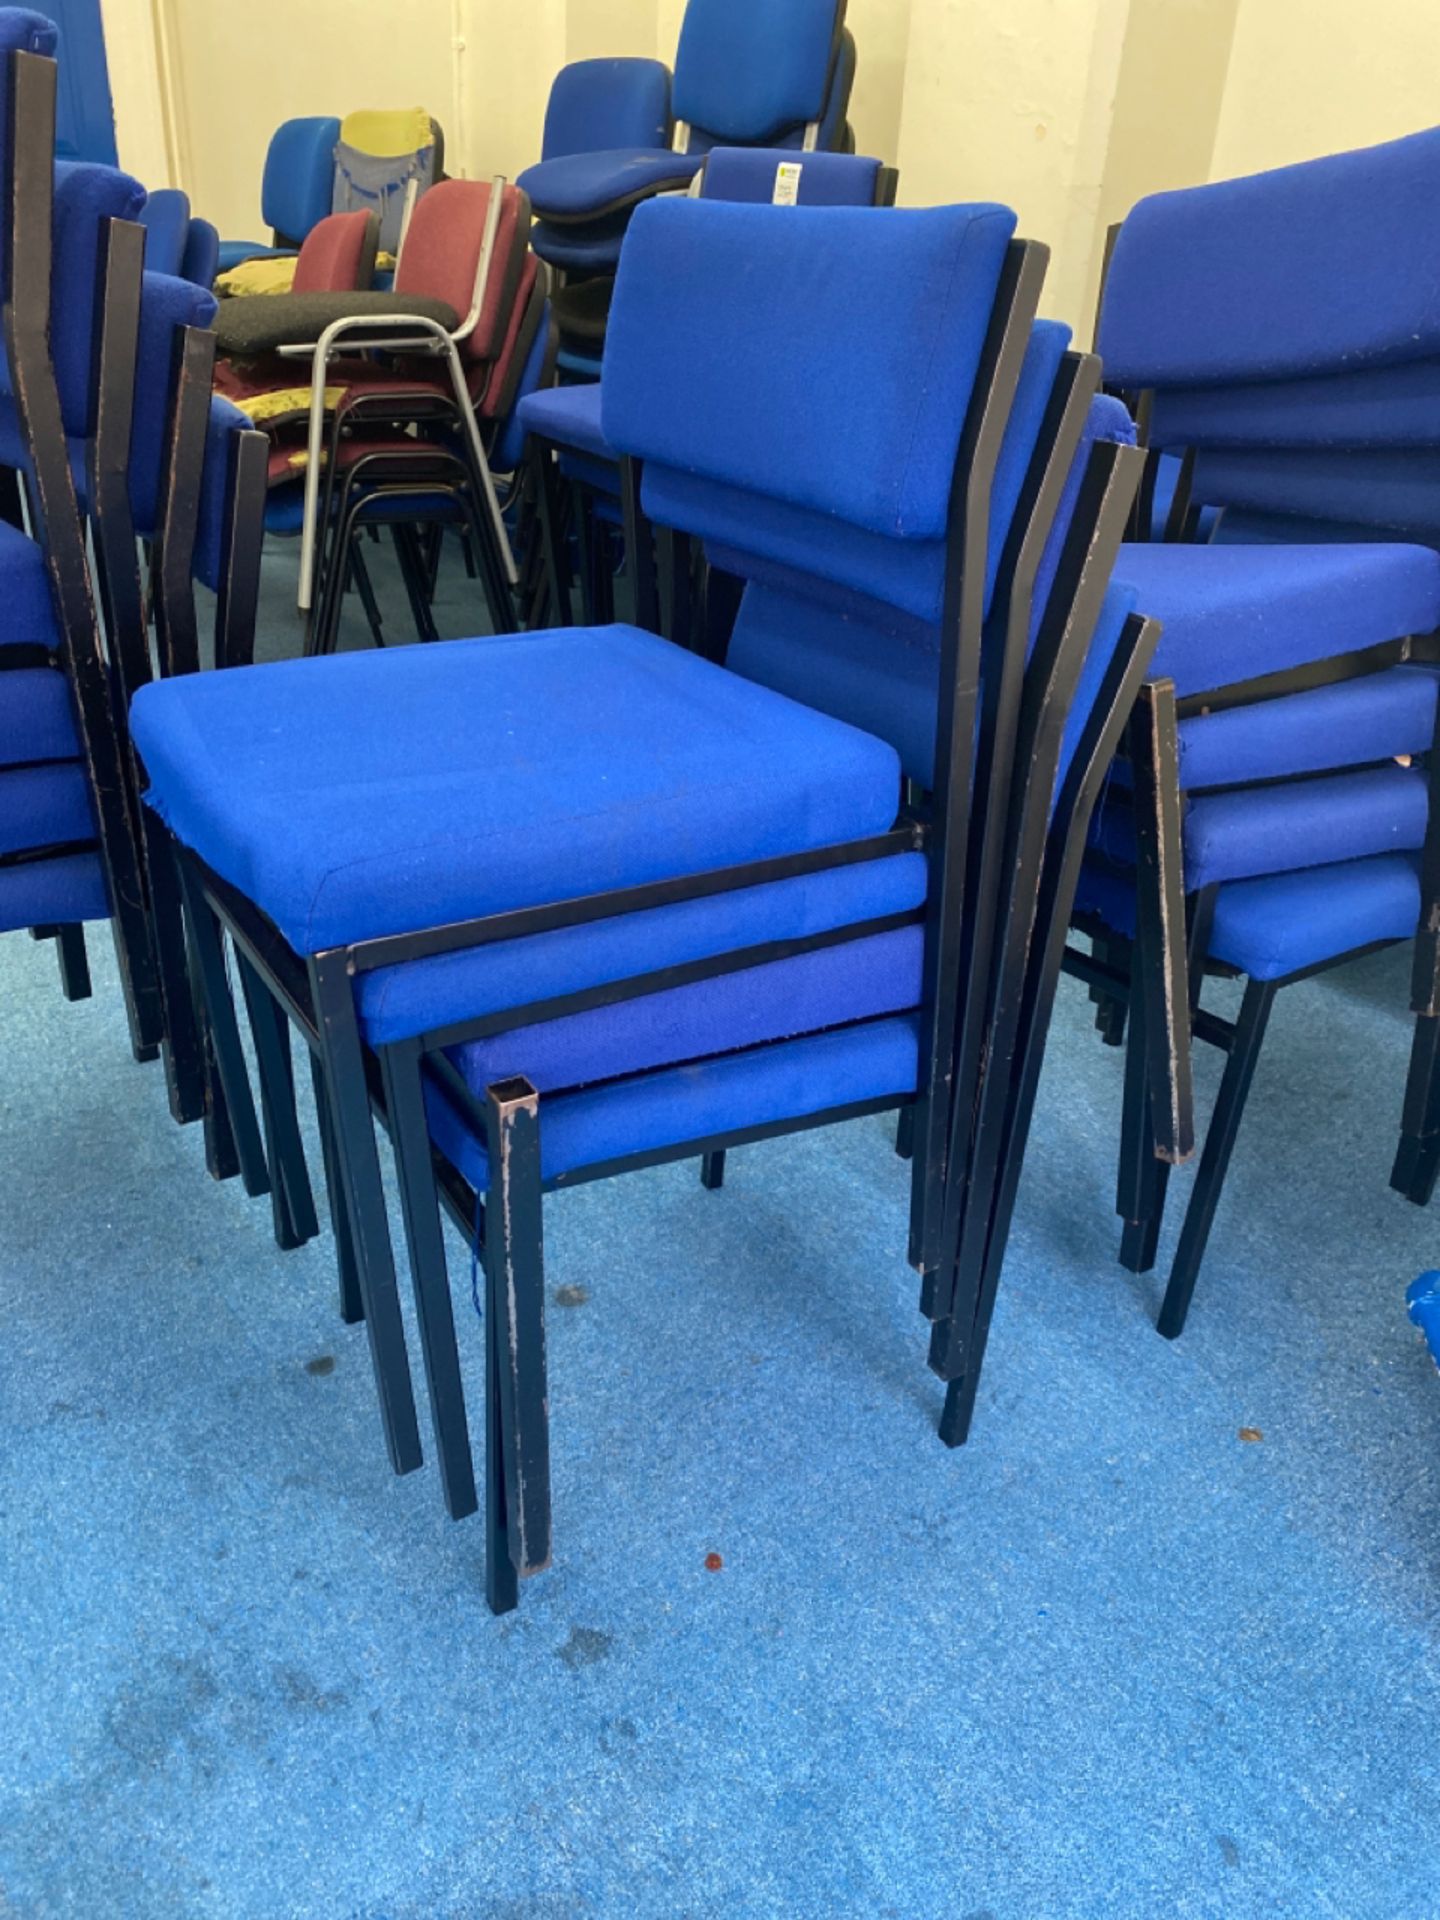 Set of 4 Cusioned Classroom Chairs - Image 11 of 14